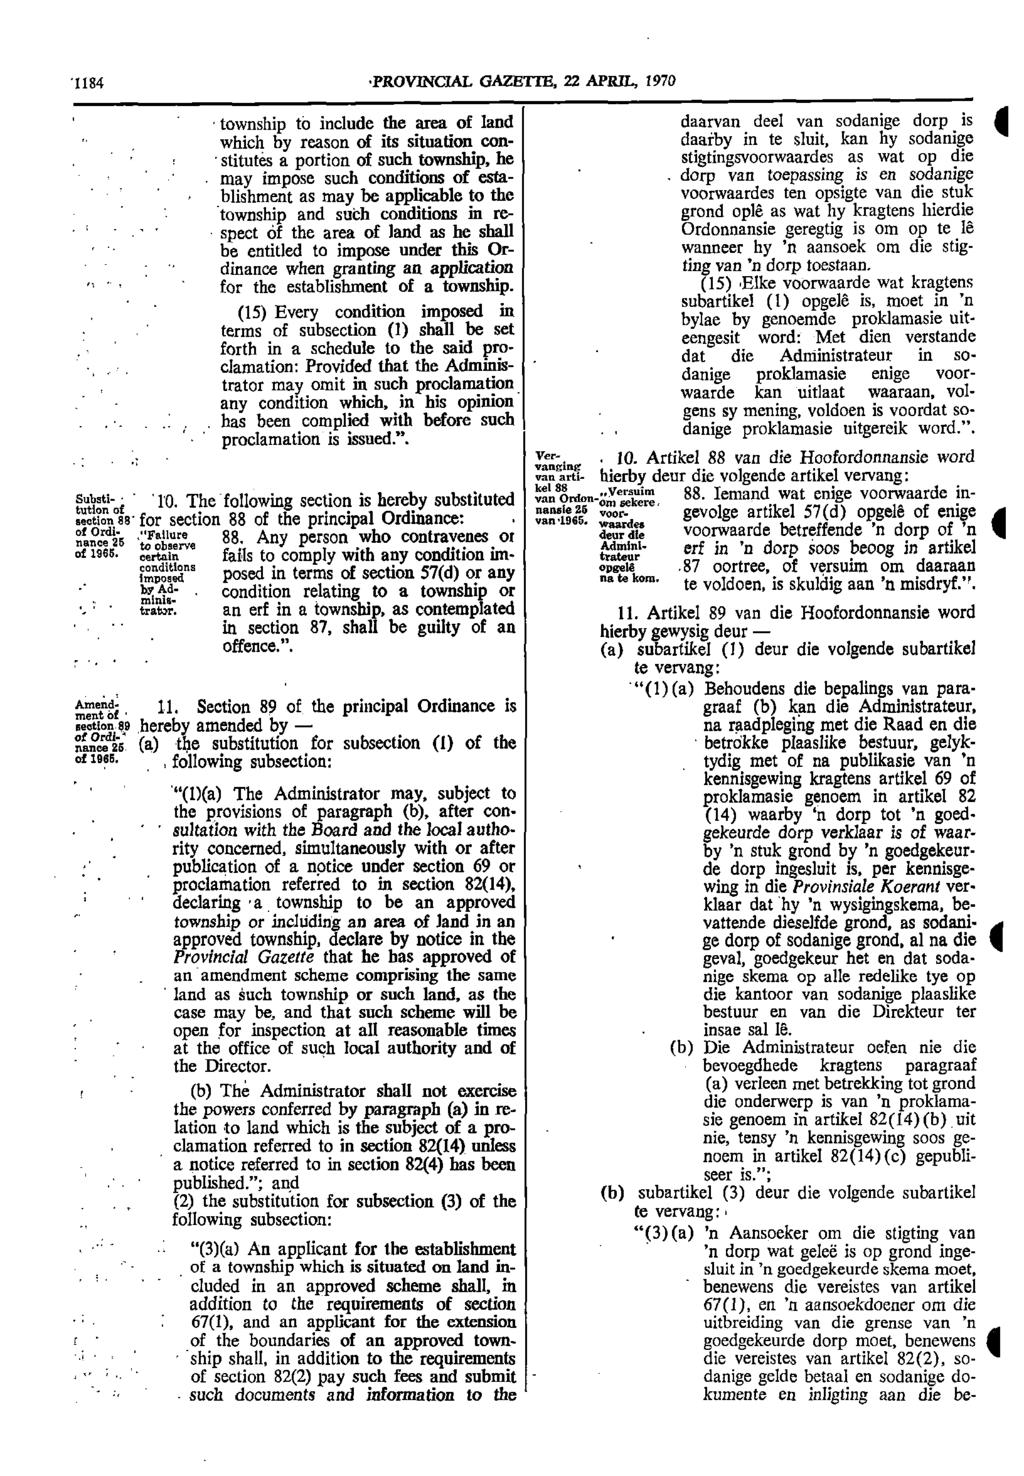 1184 PROVINCIAL GAZETTE 22 APRIL 1970 township to include the area of land daarvan deel van sodanige dorp is which by reason of its situation con daarby in te sluit kan hy sodanige stitutes a portion